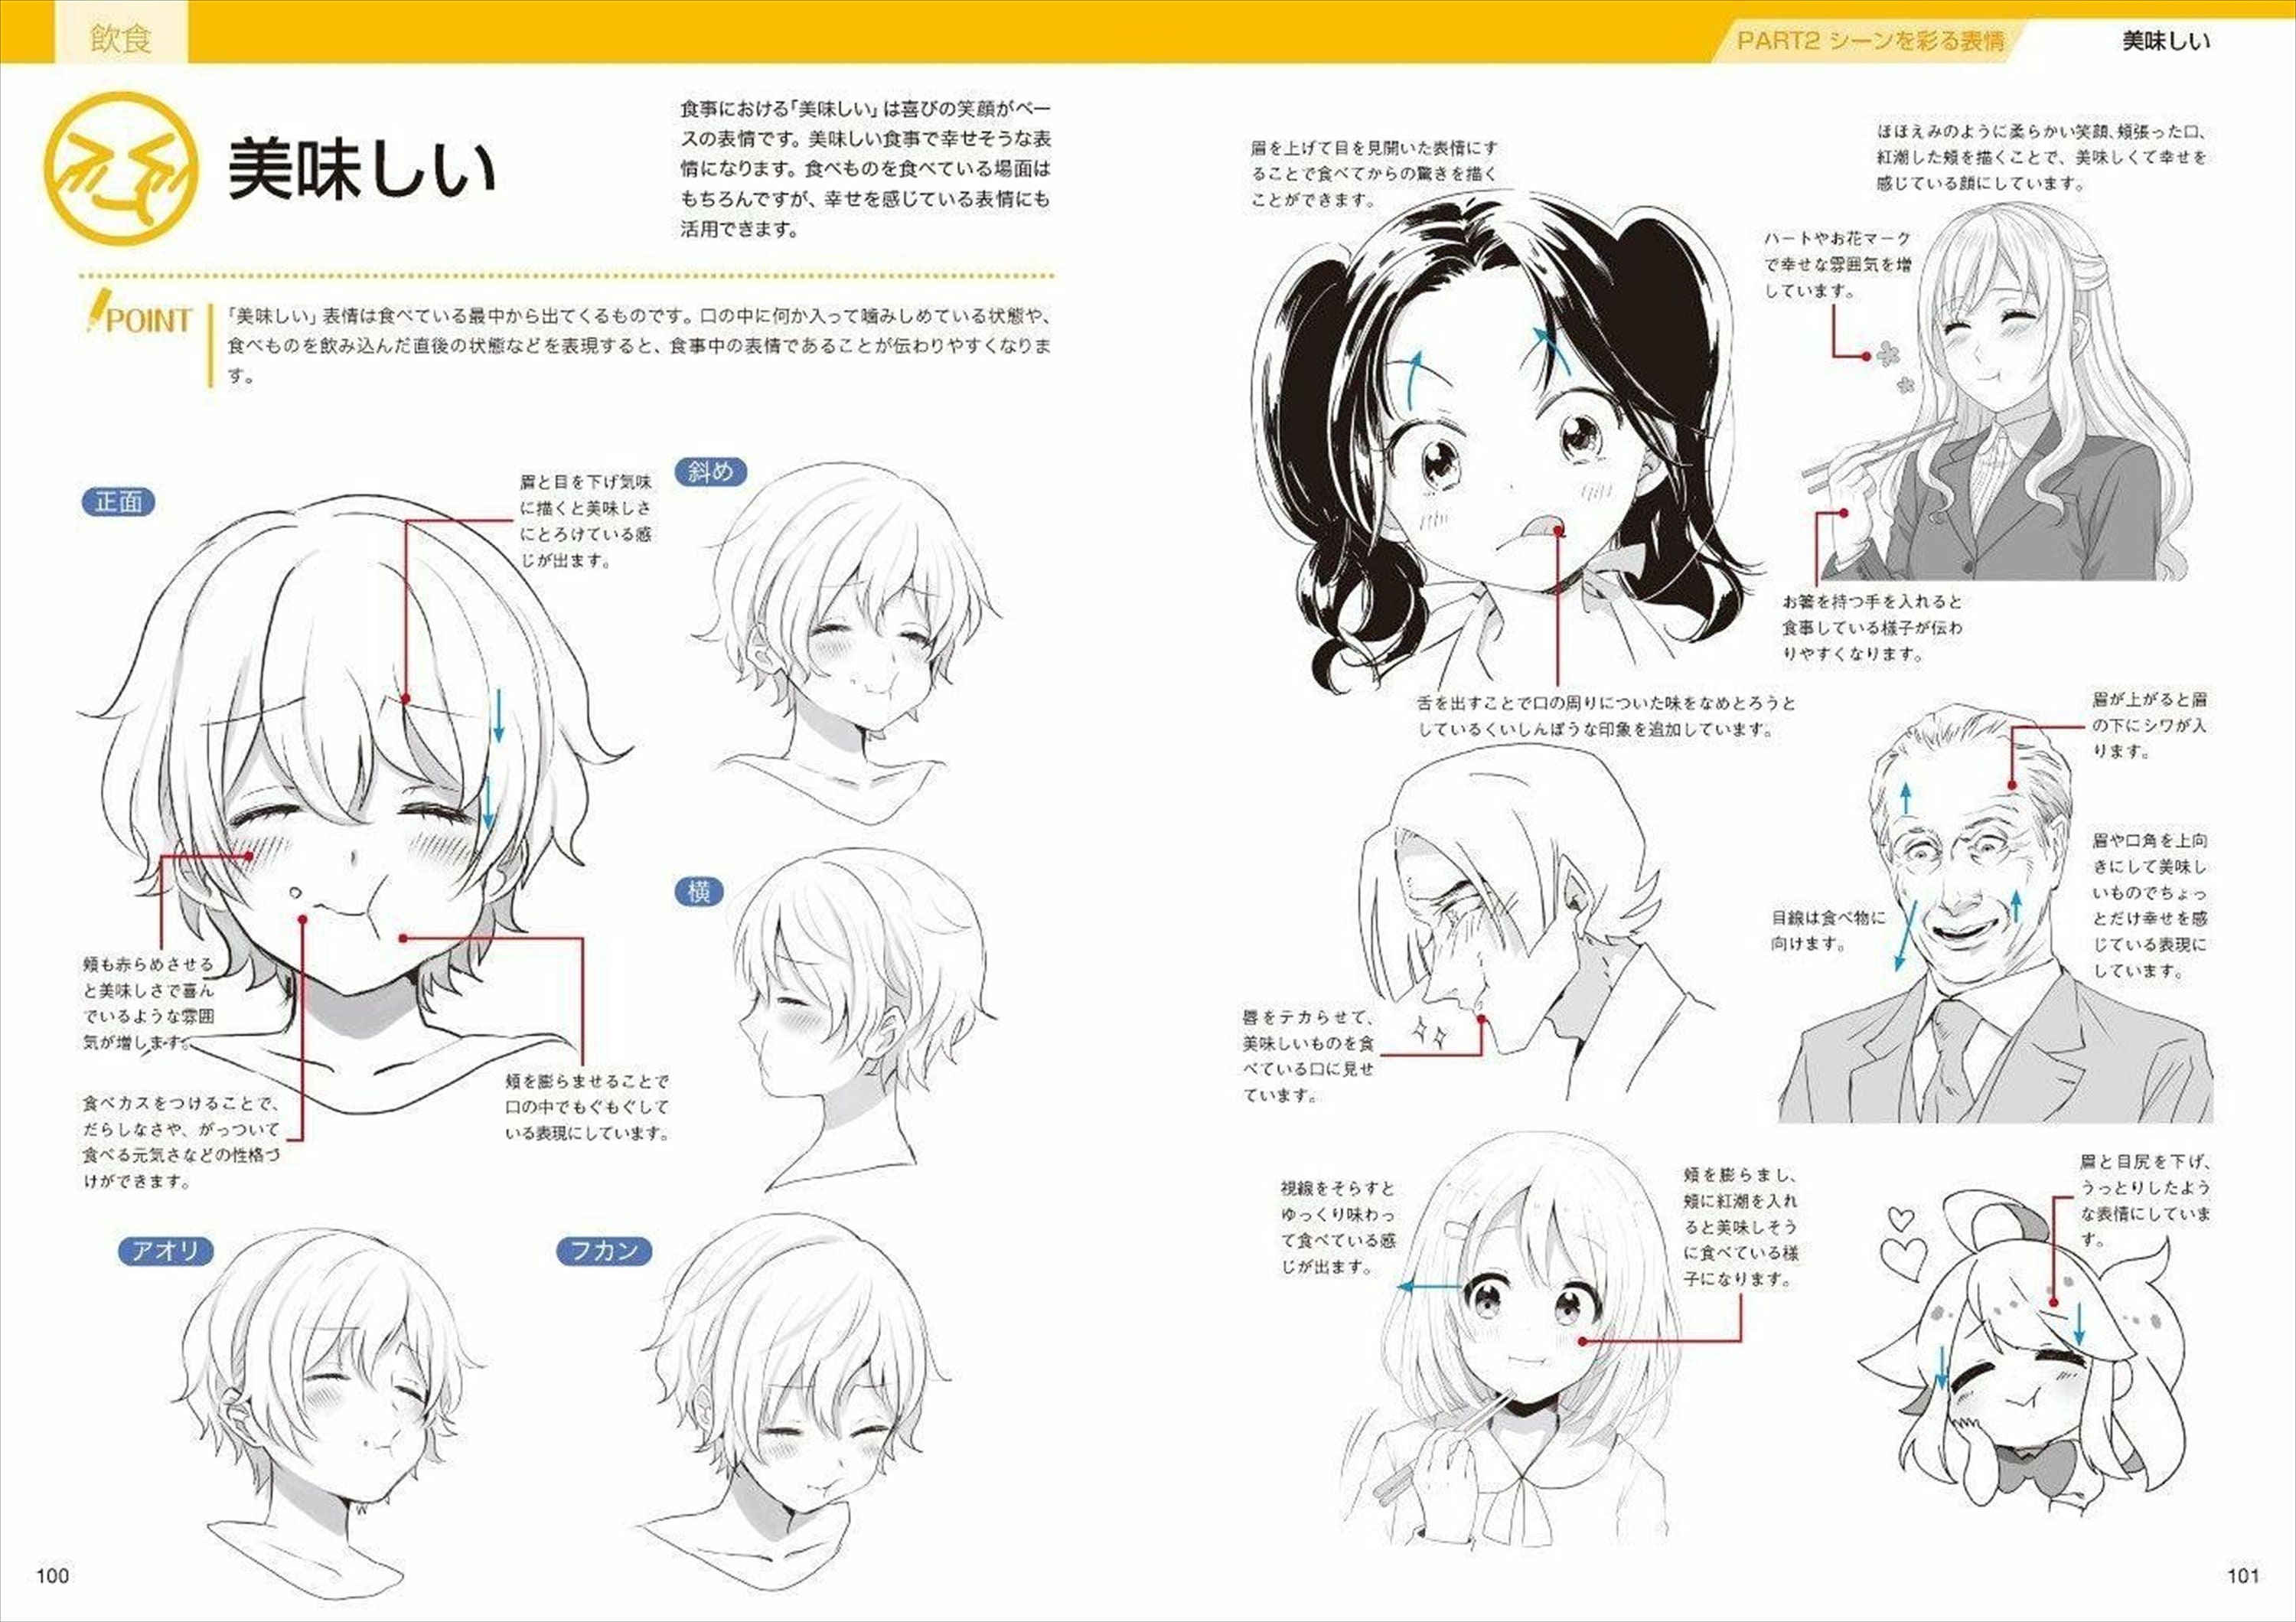 From the basics. How to draw manga eyes and expressions by kamapon